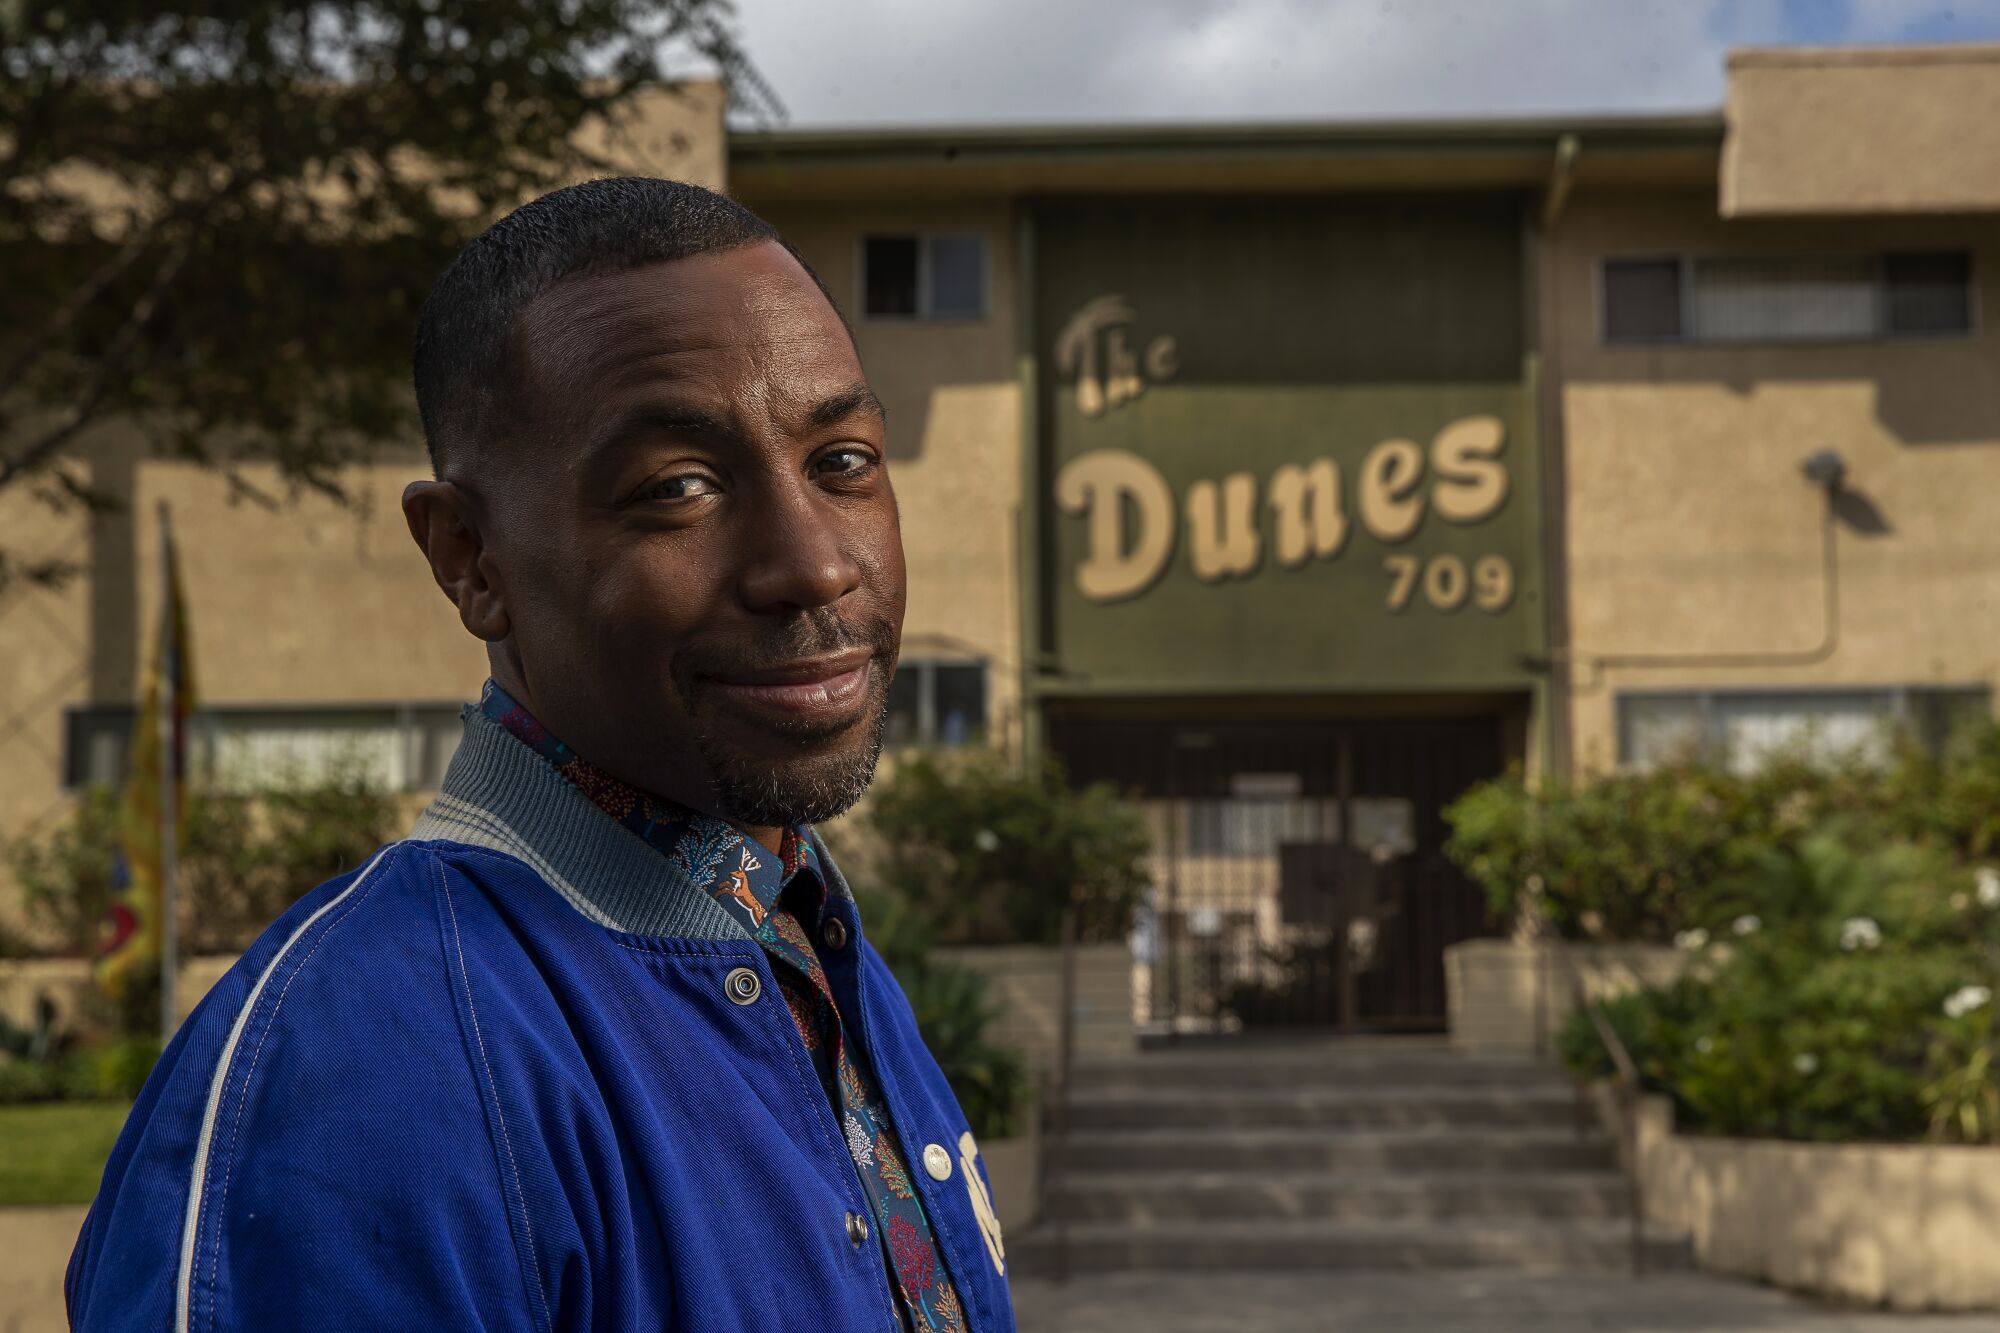 "Insecure" showrunner Prentice Penny stands in front of the Dunes apartment complex in Inglewood.